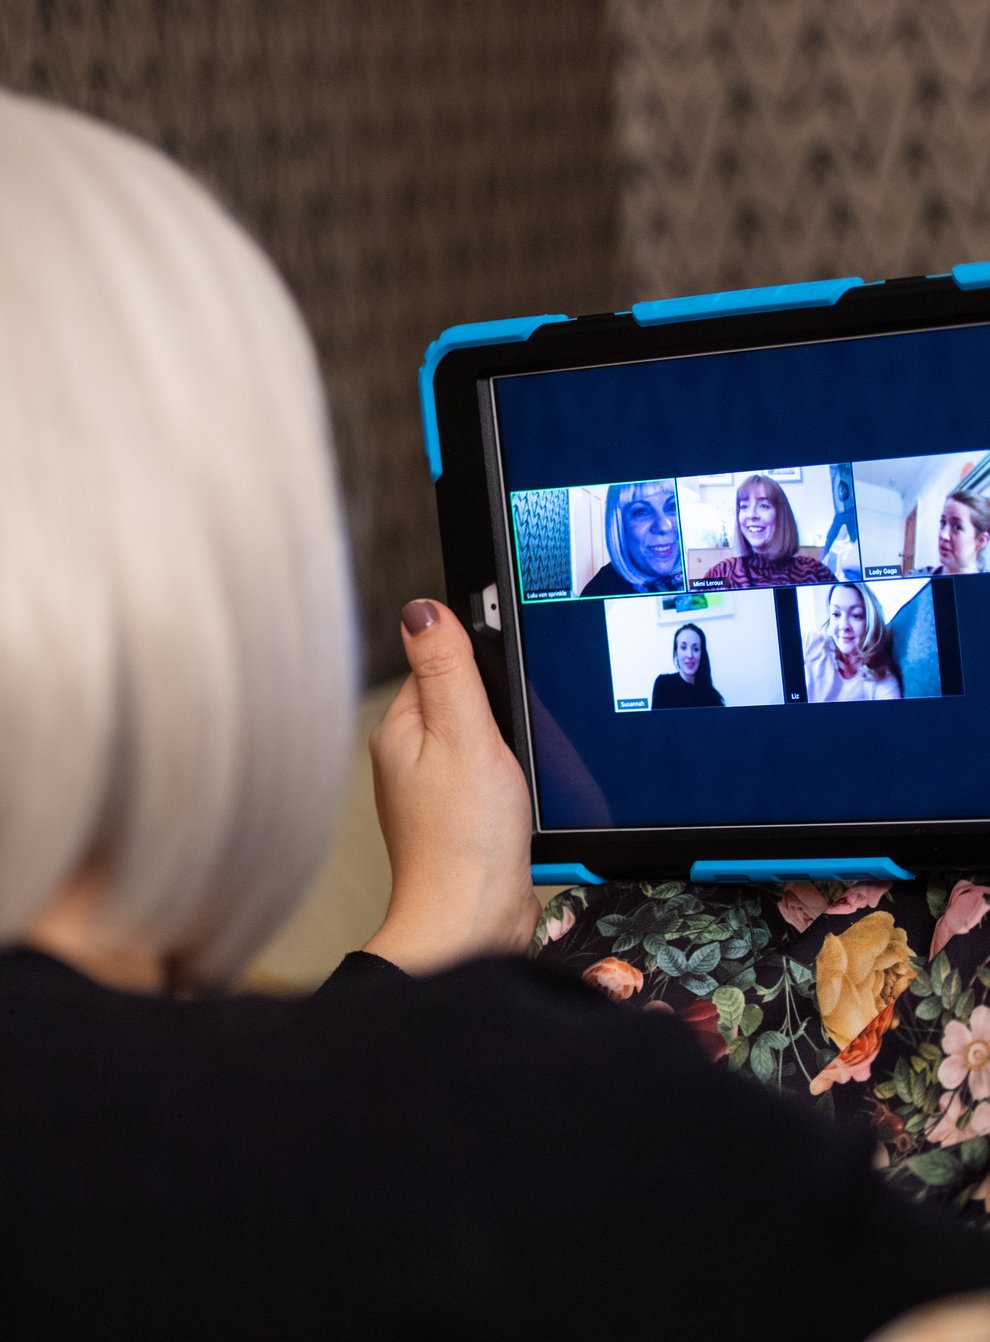 A group of women use the Zoom video conferencing application to have a group chat from their separate homes (PA)